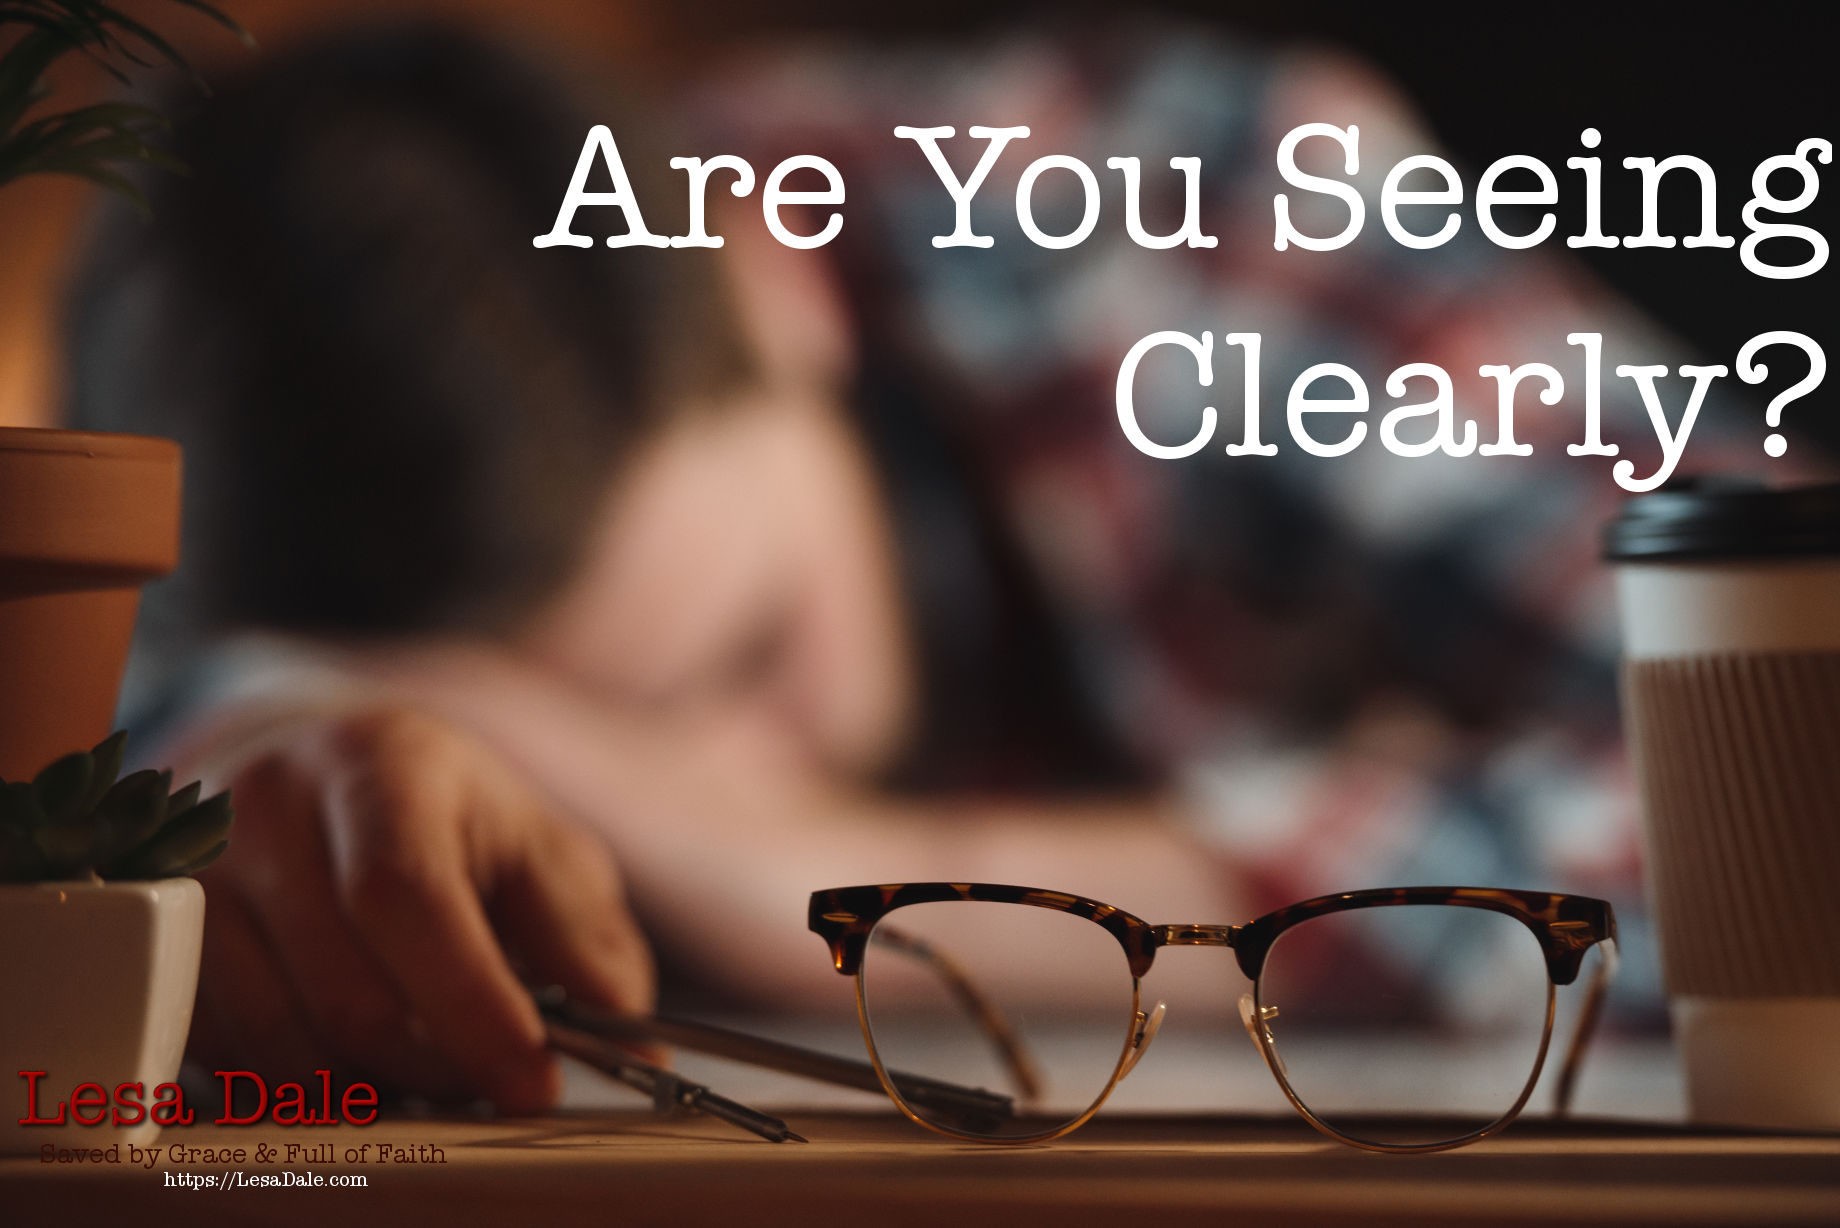 Are You Seeing Clearly?